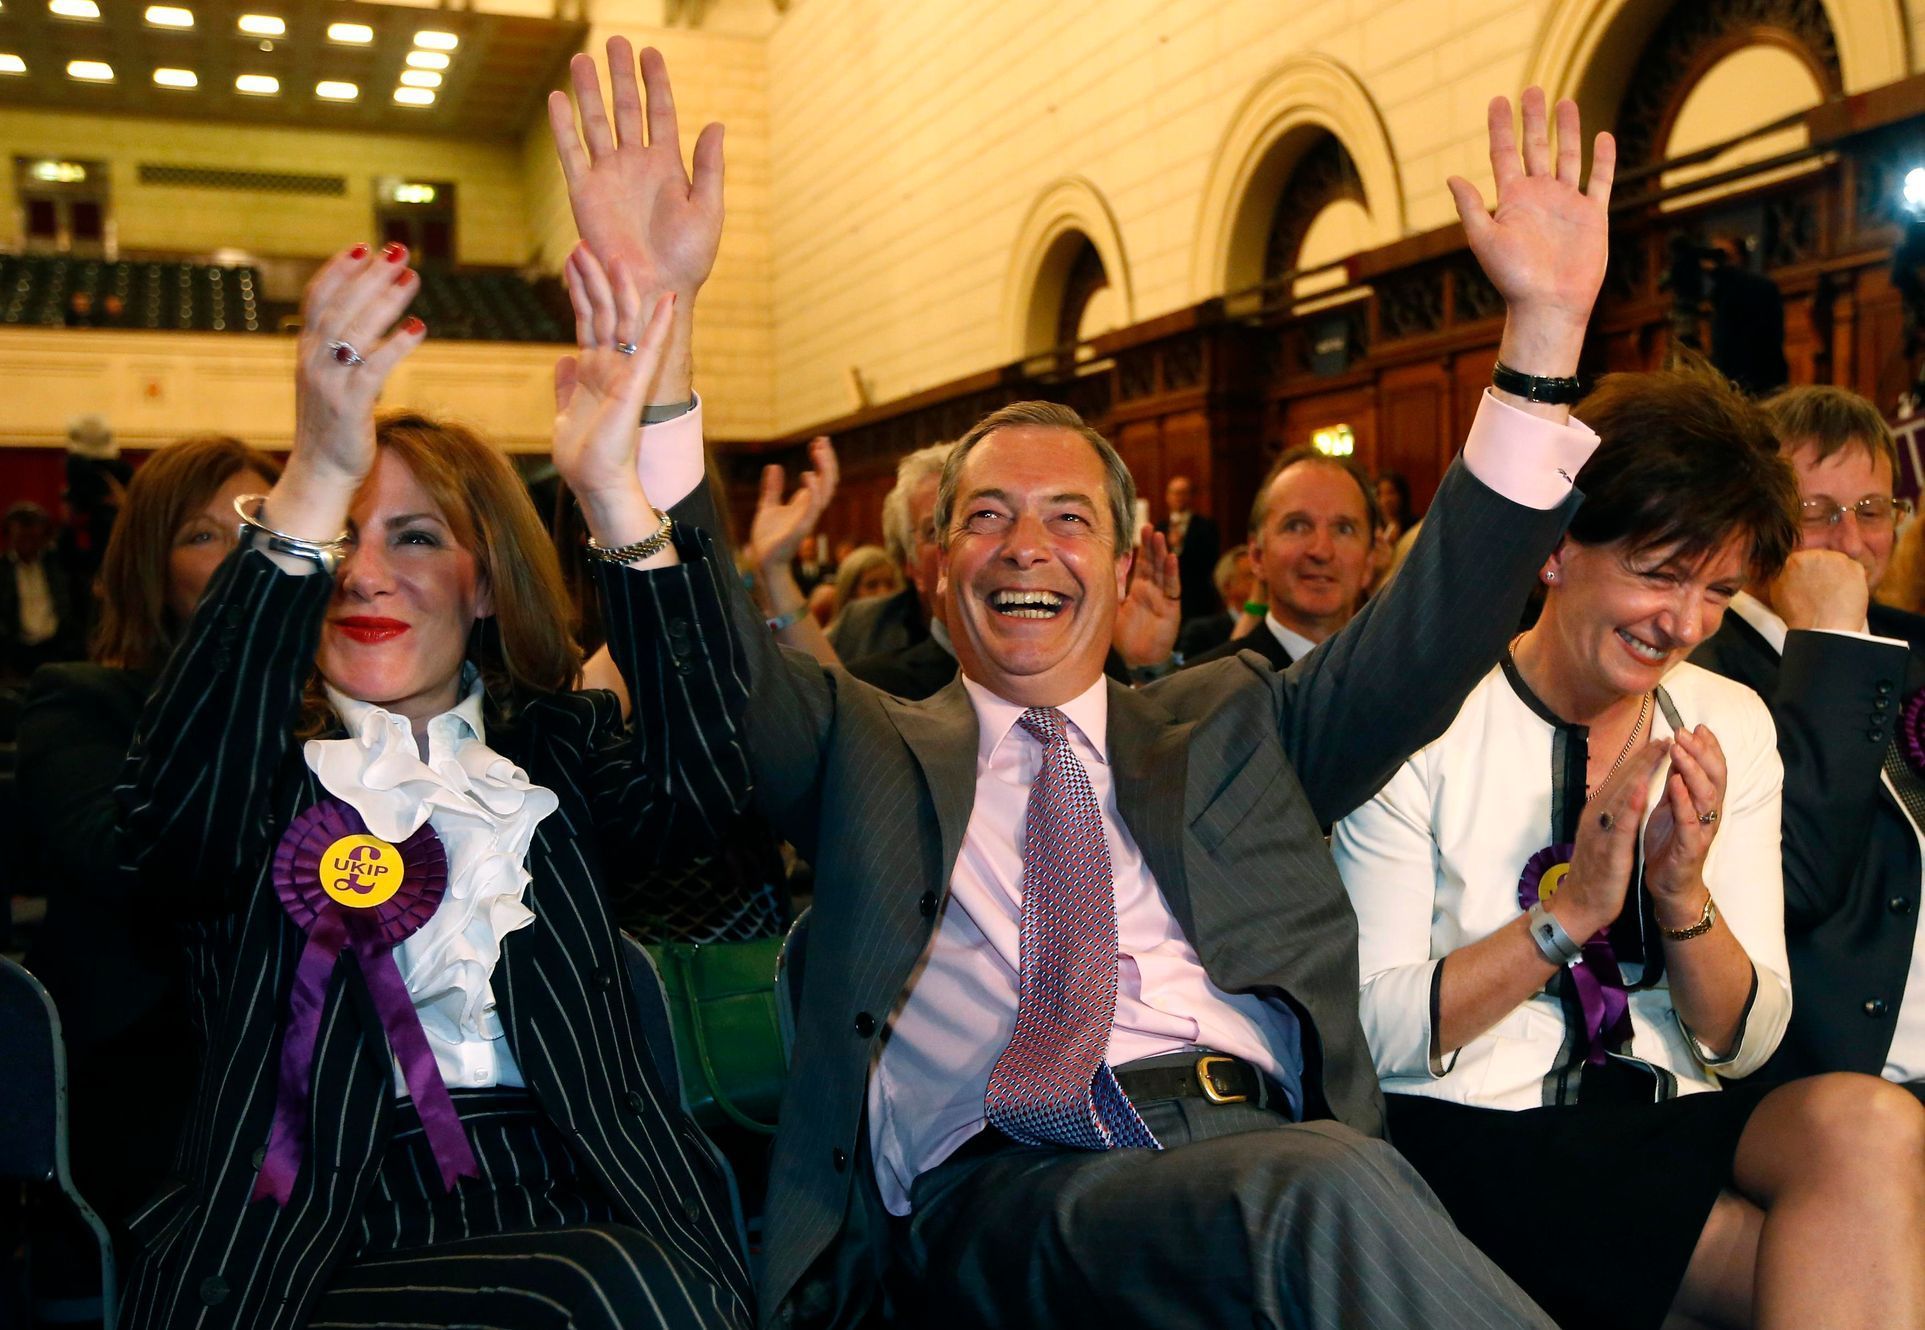 UK Independence Party  (UKIP) leader Nigel Farage, and UKIP candidates Janice Atkinson and Diane Jones react to the results of the European Parliament election for the south east region, in Southampto